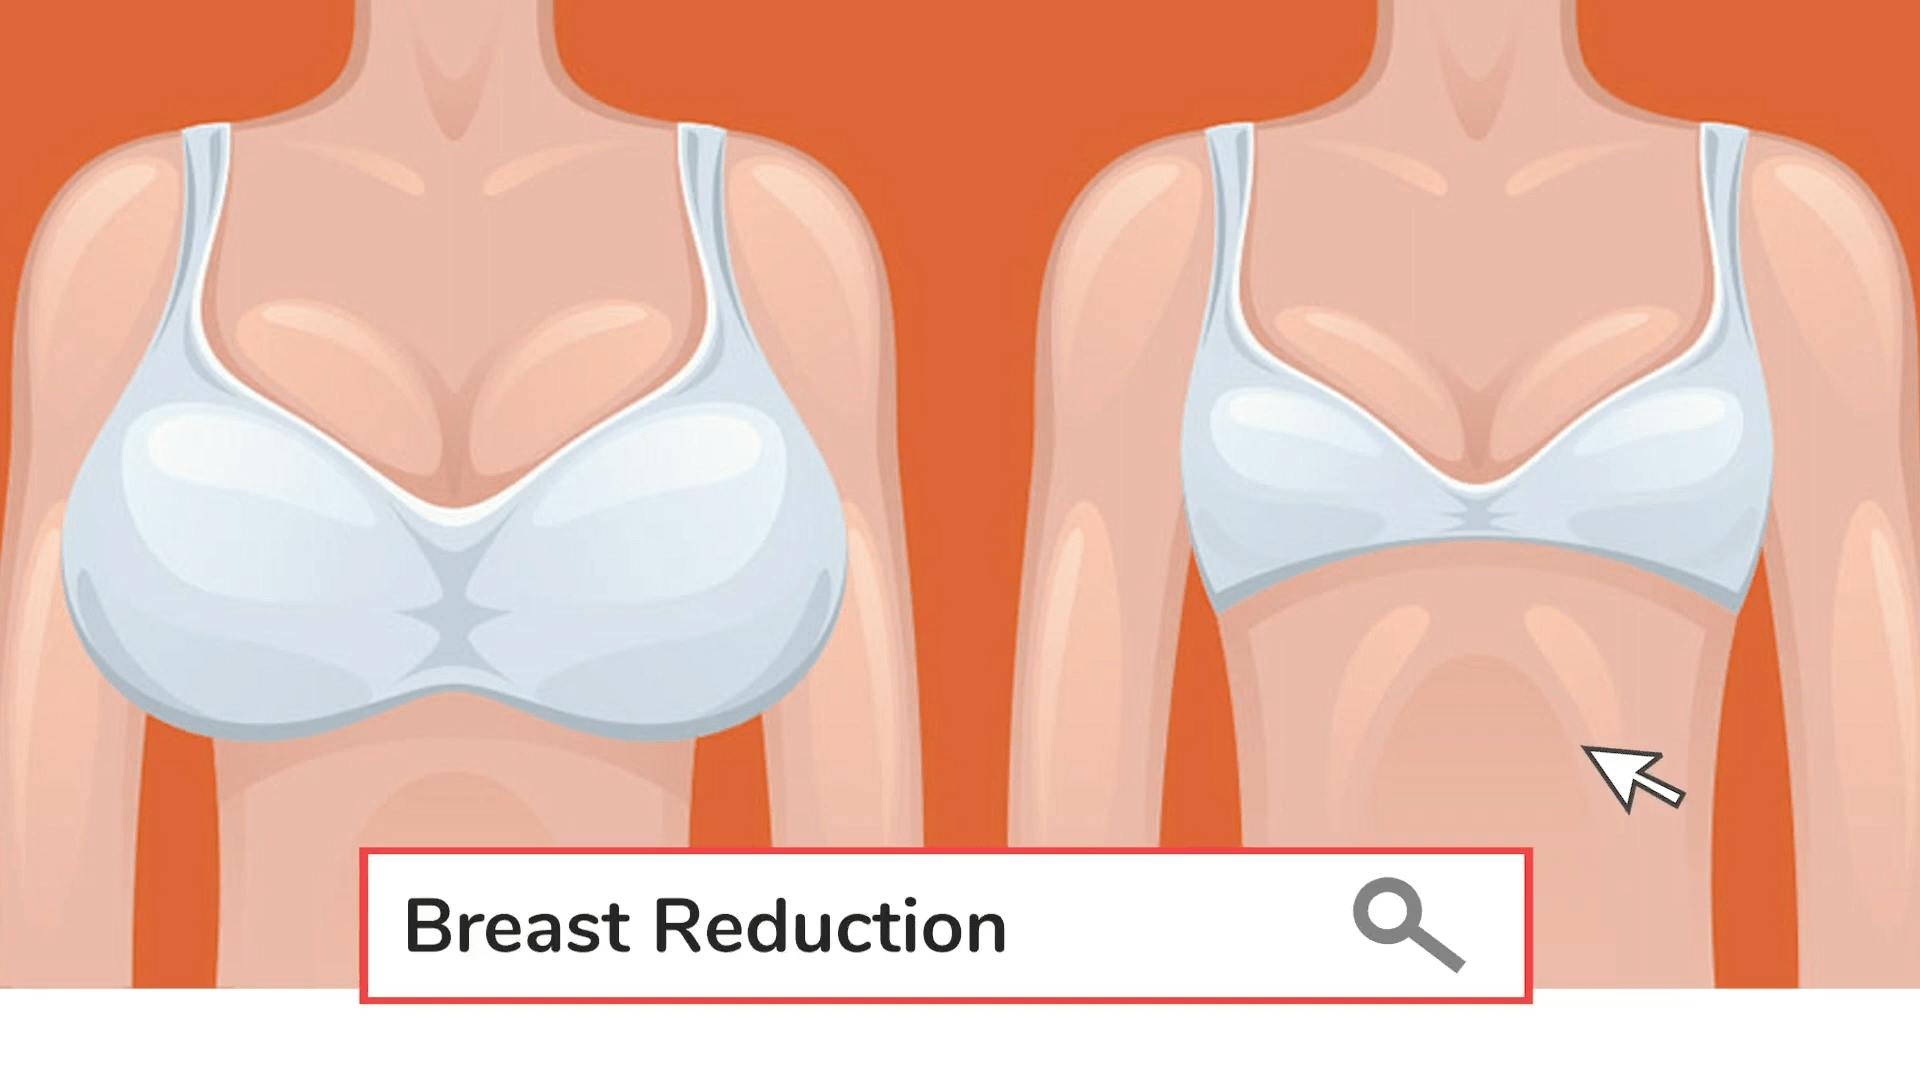 Nipple and Areola Reconstruction: Restoring Appearance - Leif